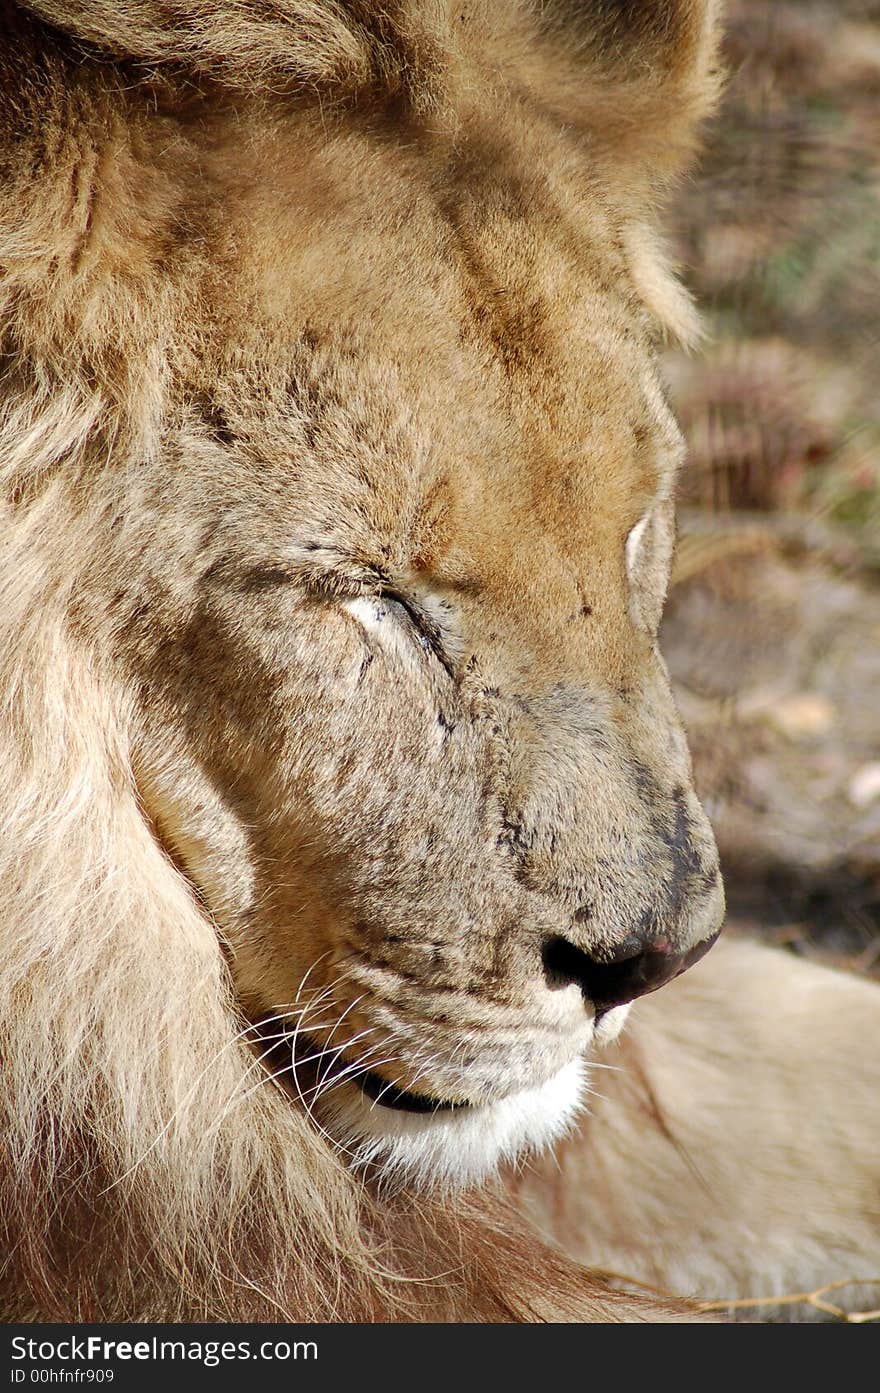 A lion sleeping in the sun